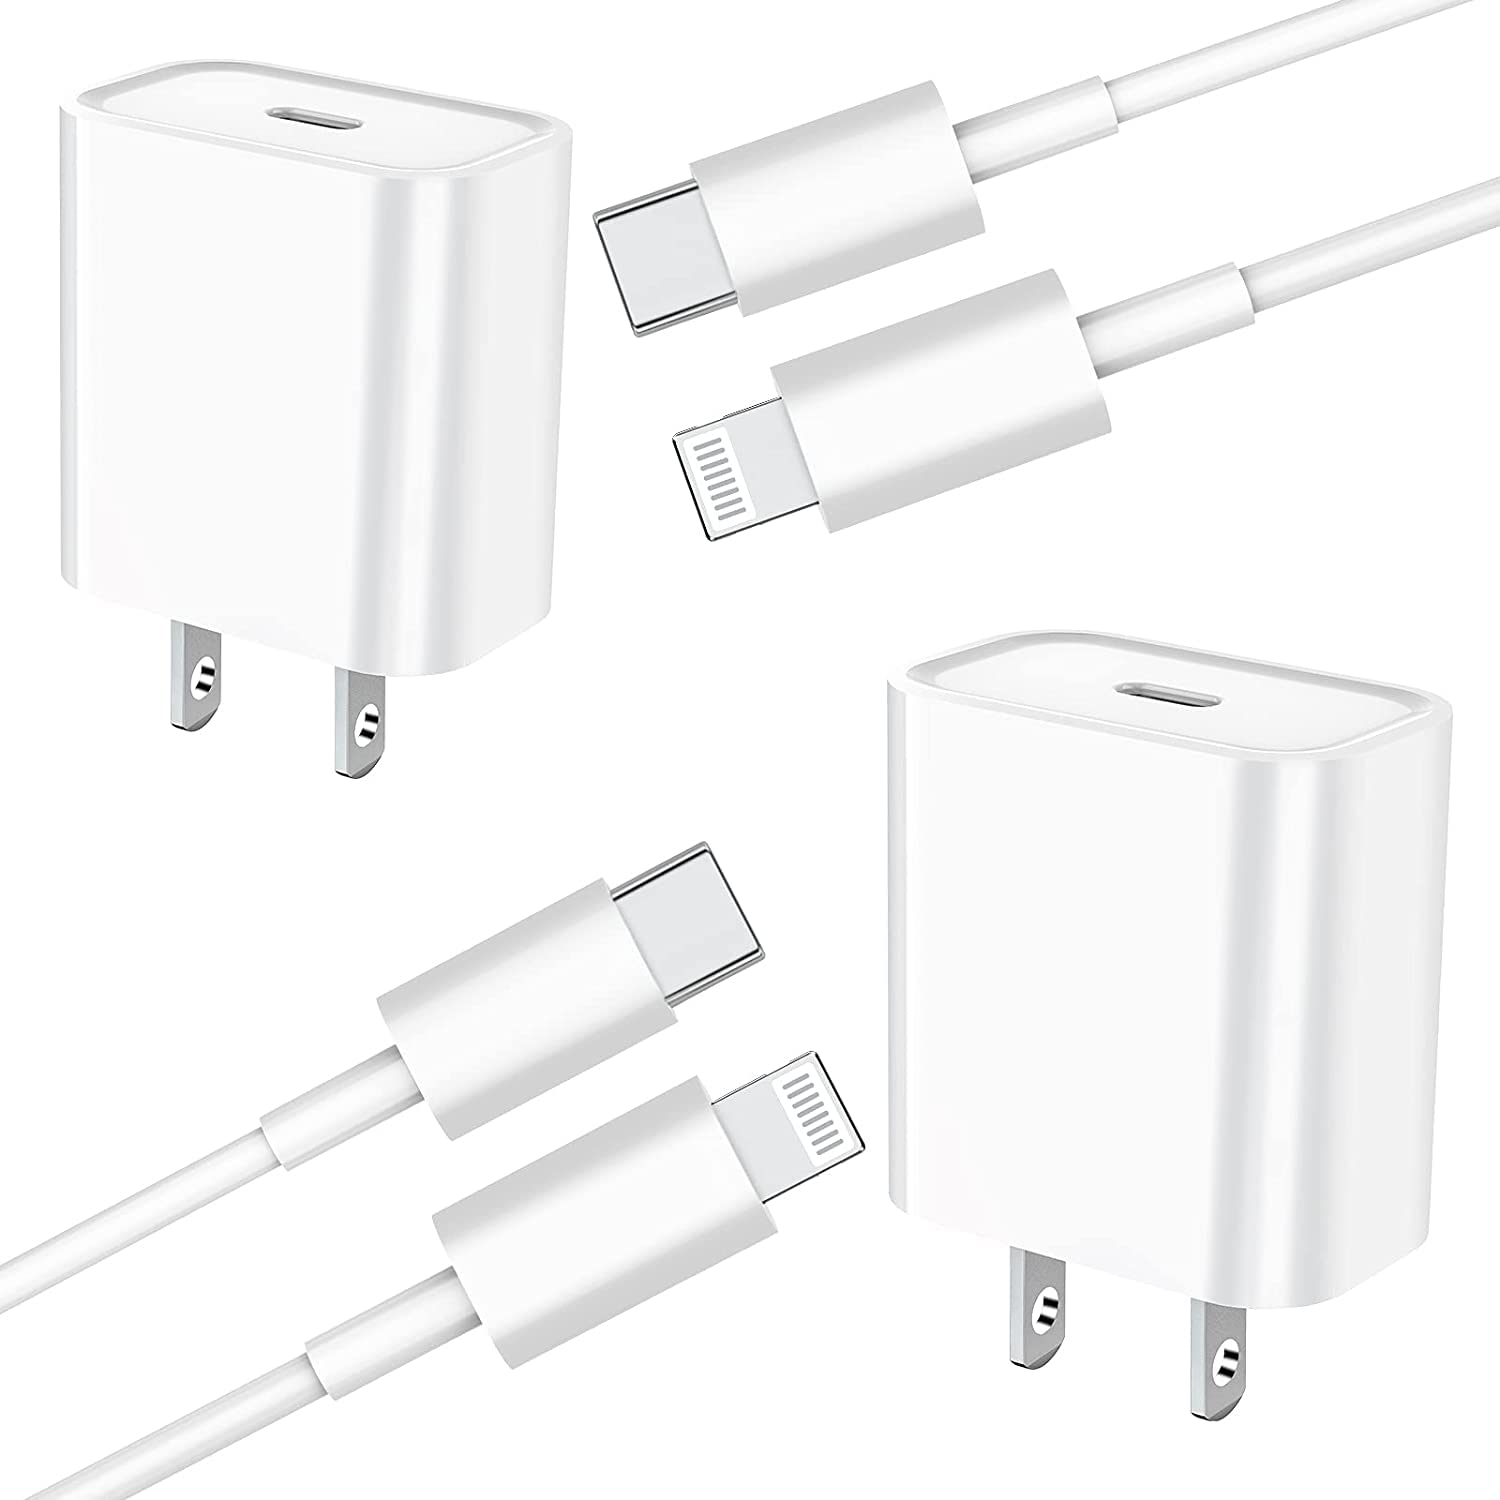 iPhone 13 USB C 20W Fast Charger,【Apple MFi Certified】6.6FT USB C to Lightning Cable with Type-C Power Delivery Wall Plug Charging Adapter Compatible for iPhone 13/12/SE/11/XS/XR/X/8,iPad,AirPods